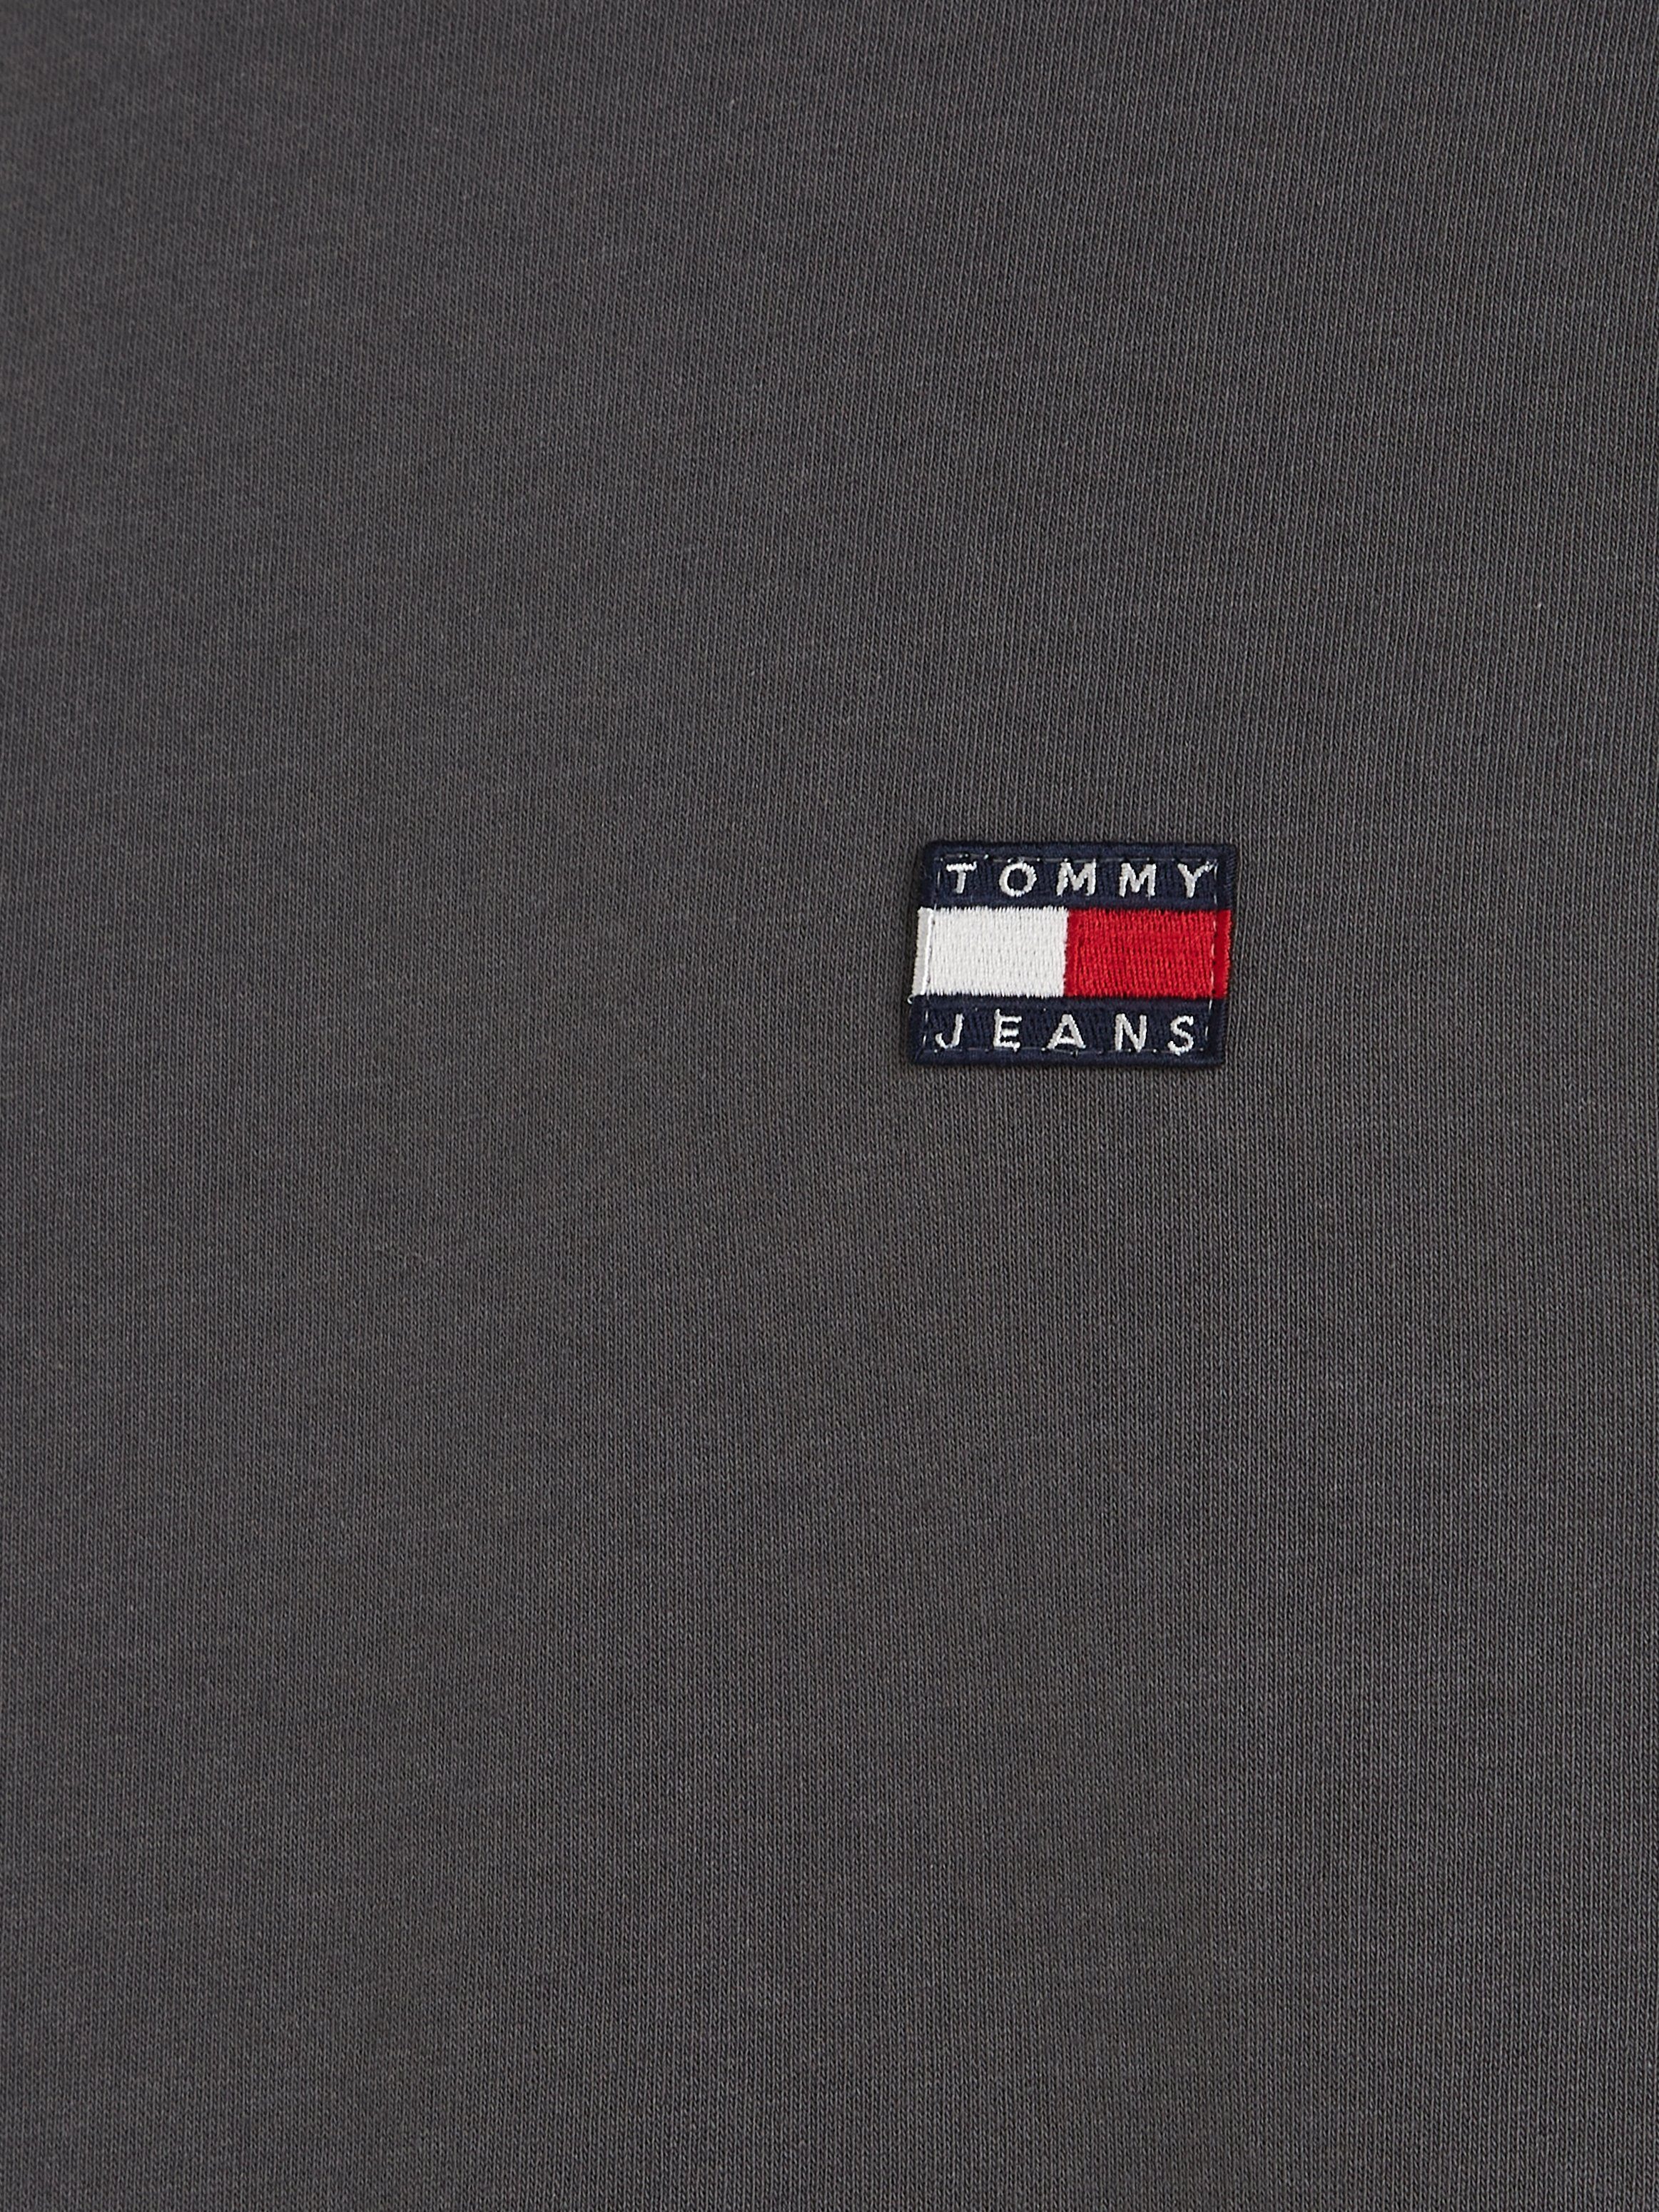 New T-Shirt BADGE Charcoal Tommy Jeans TJM TOMMY XS TEE CLSC